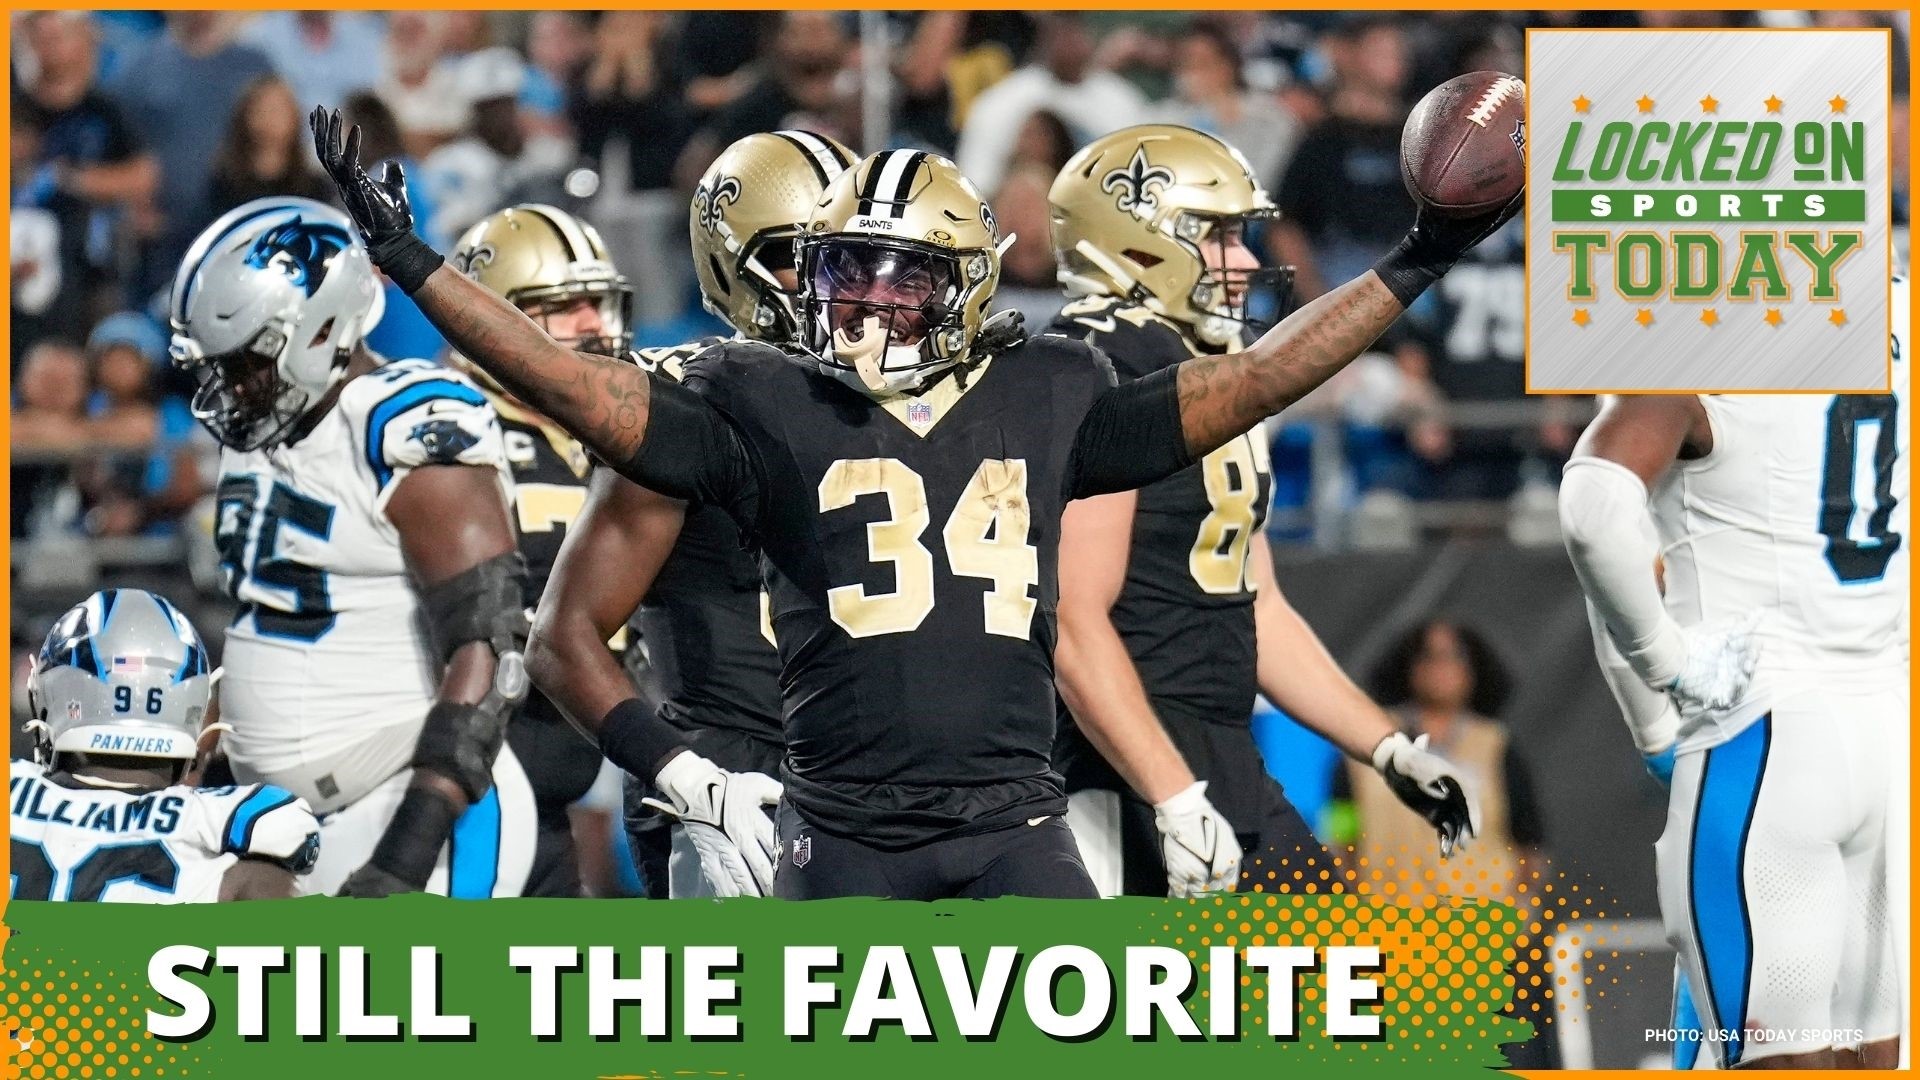 Discussing the day's top sports stories from the Saints look like the favorite to win the NFC South to the Nick Chubb injury in Monday Night Football.